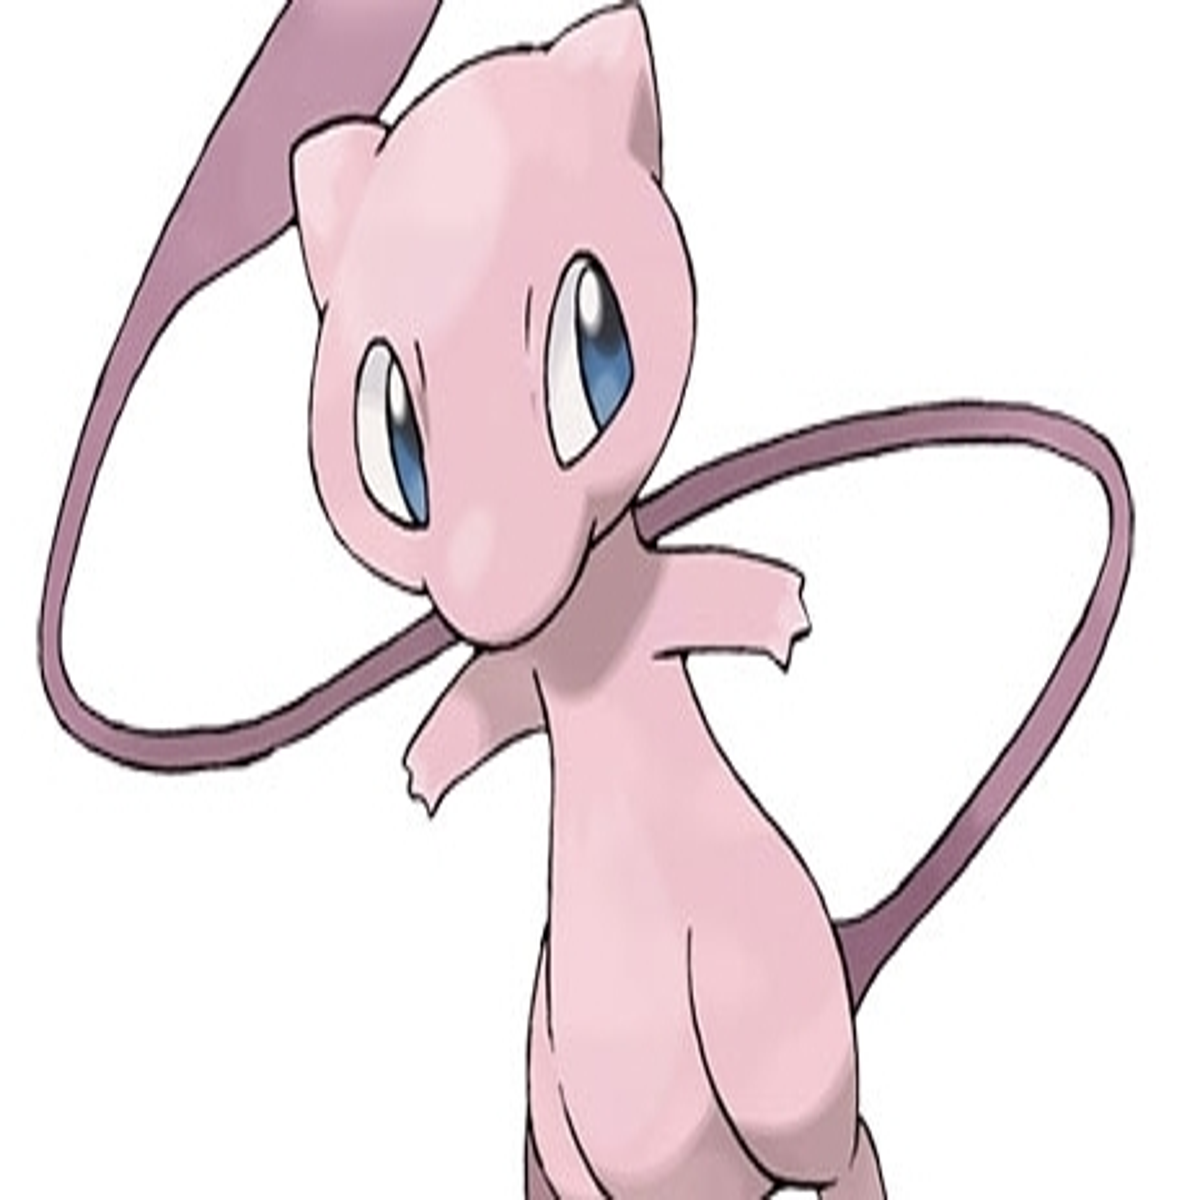 Pokémon Sword and Shield Mew explained - how to get Mew using the